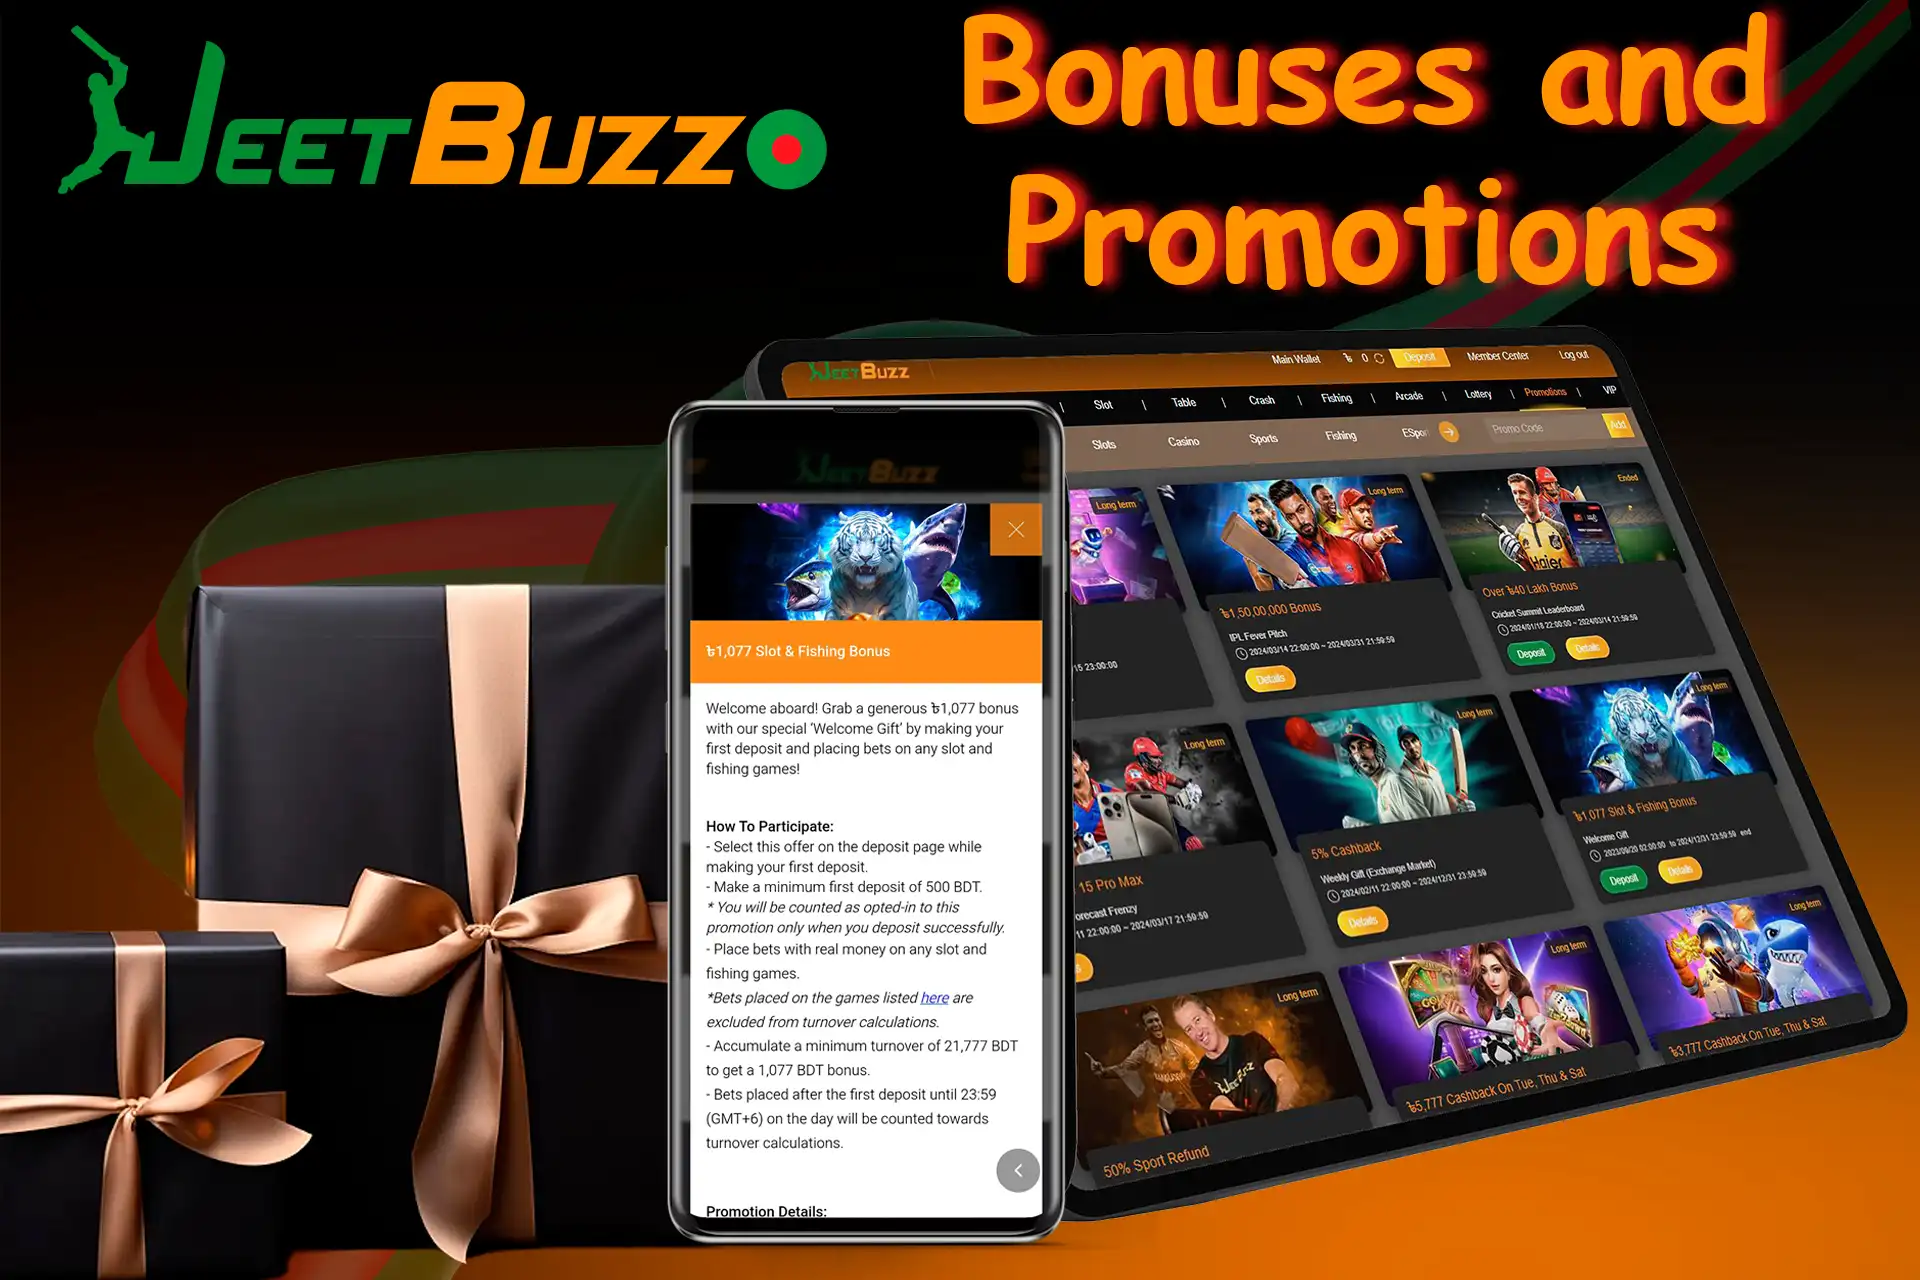 variety of bonuses and promotions in the application